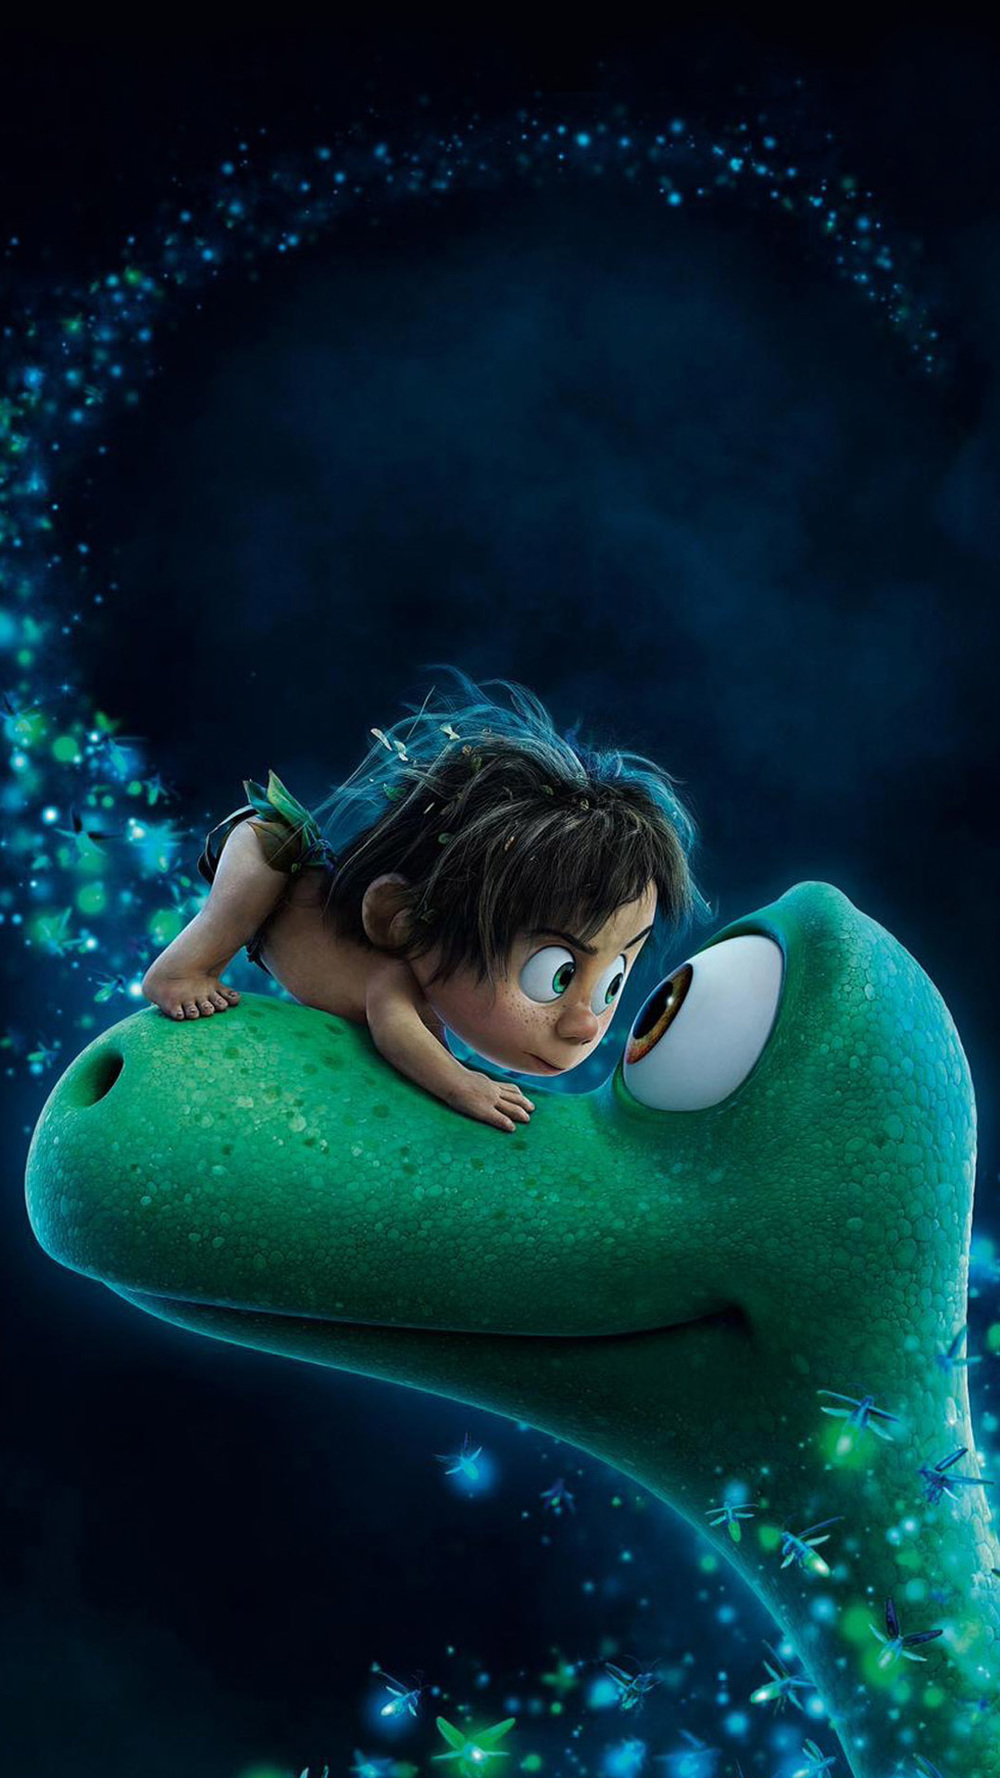 The Good Dinosaur: Downloadable Wallpaper for iOS ...